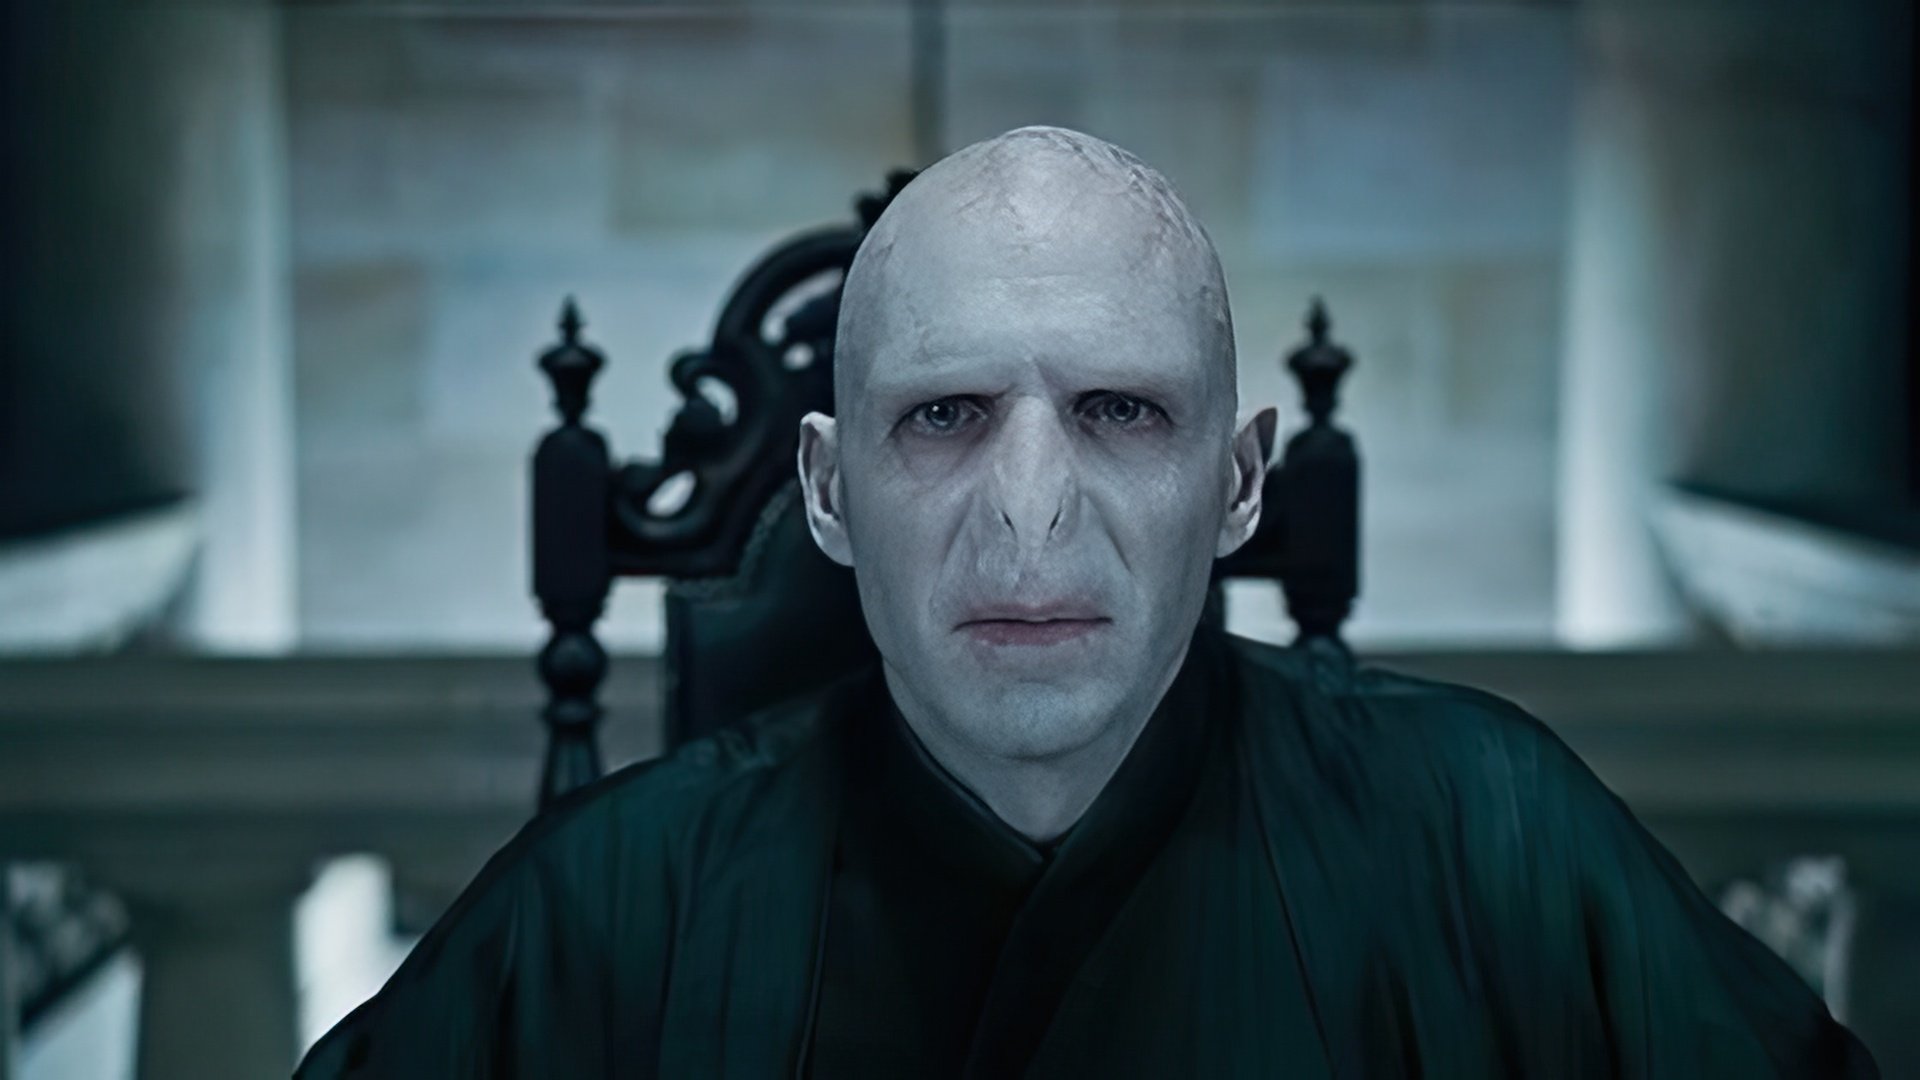 Ralph Fiennes in the image of the great and terrible Lord Voldemort